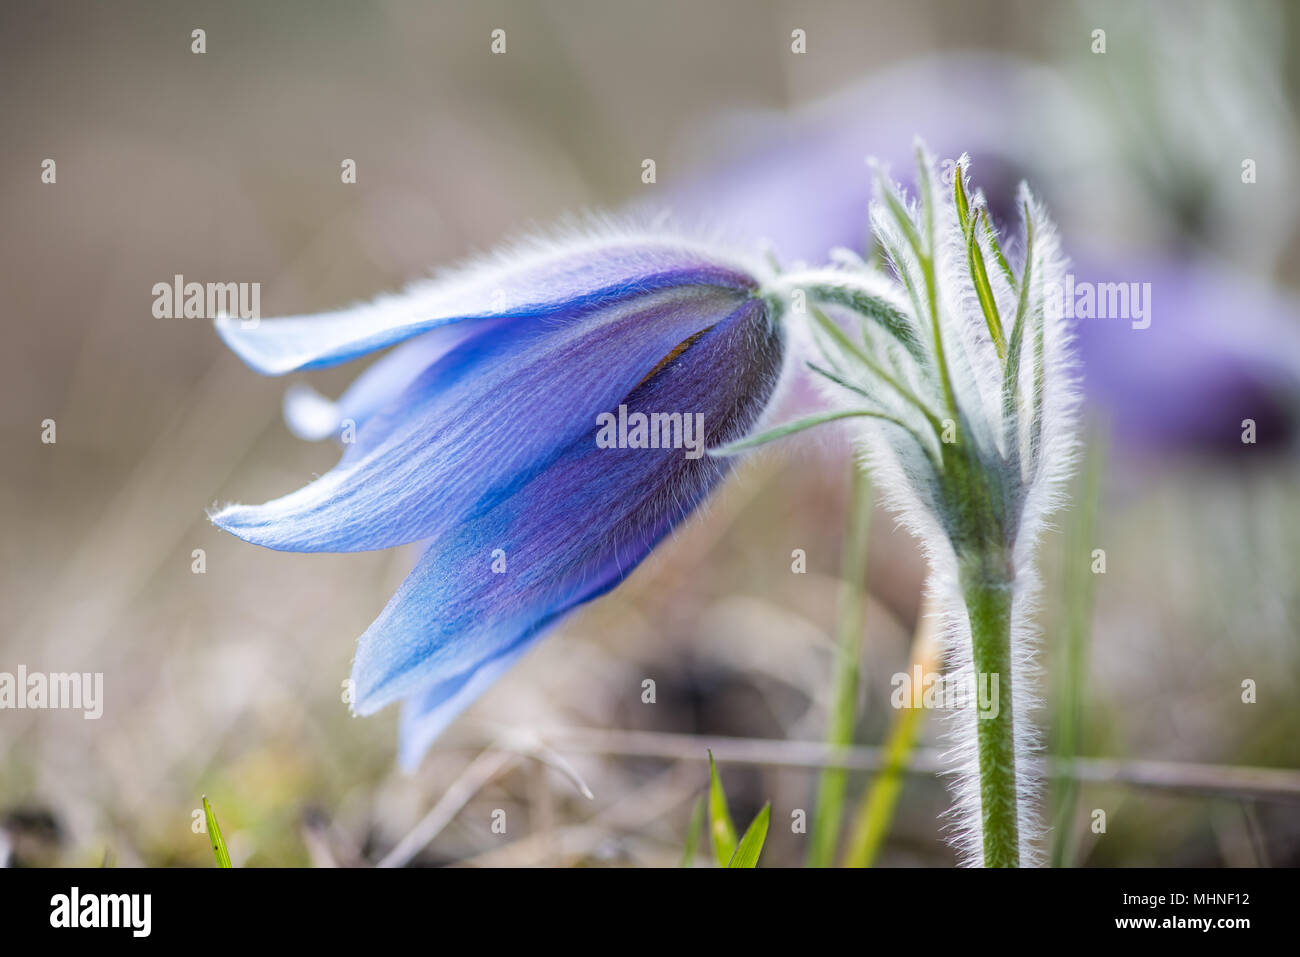 A pasque flower or Anemone pulsatilla (Pulsatilla vulgaris) against the light so the silver-grey hair stands out. Stock Photo